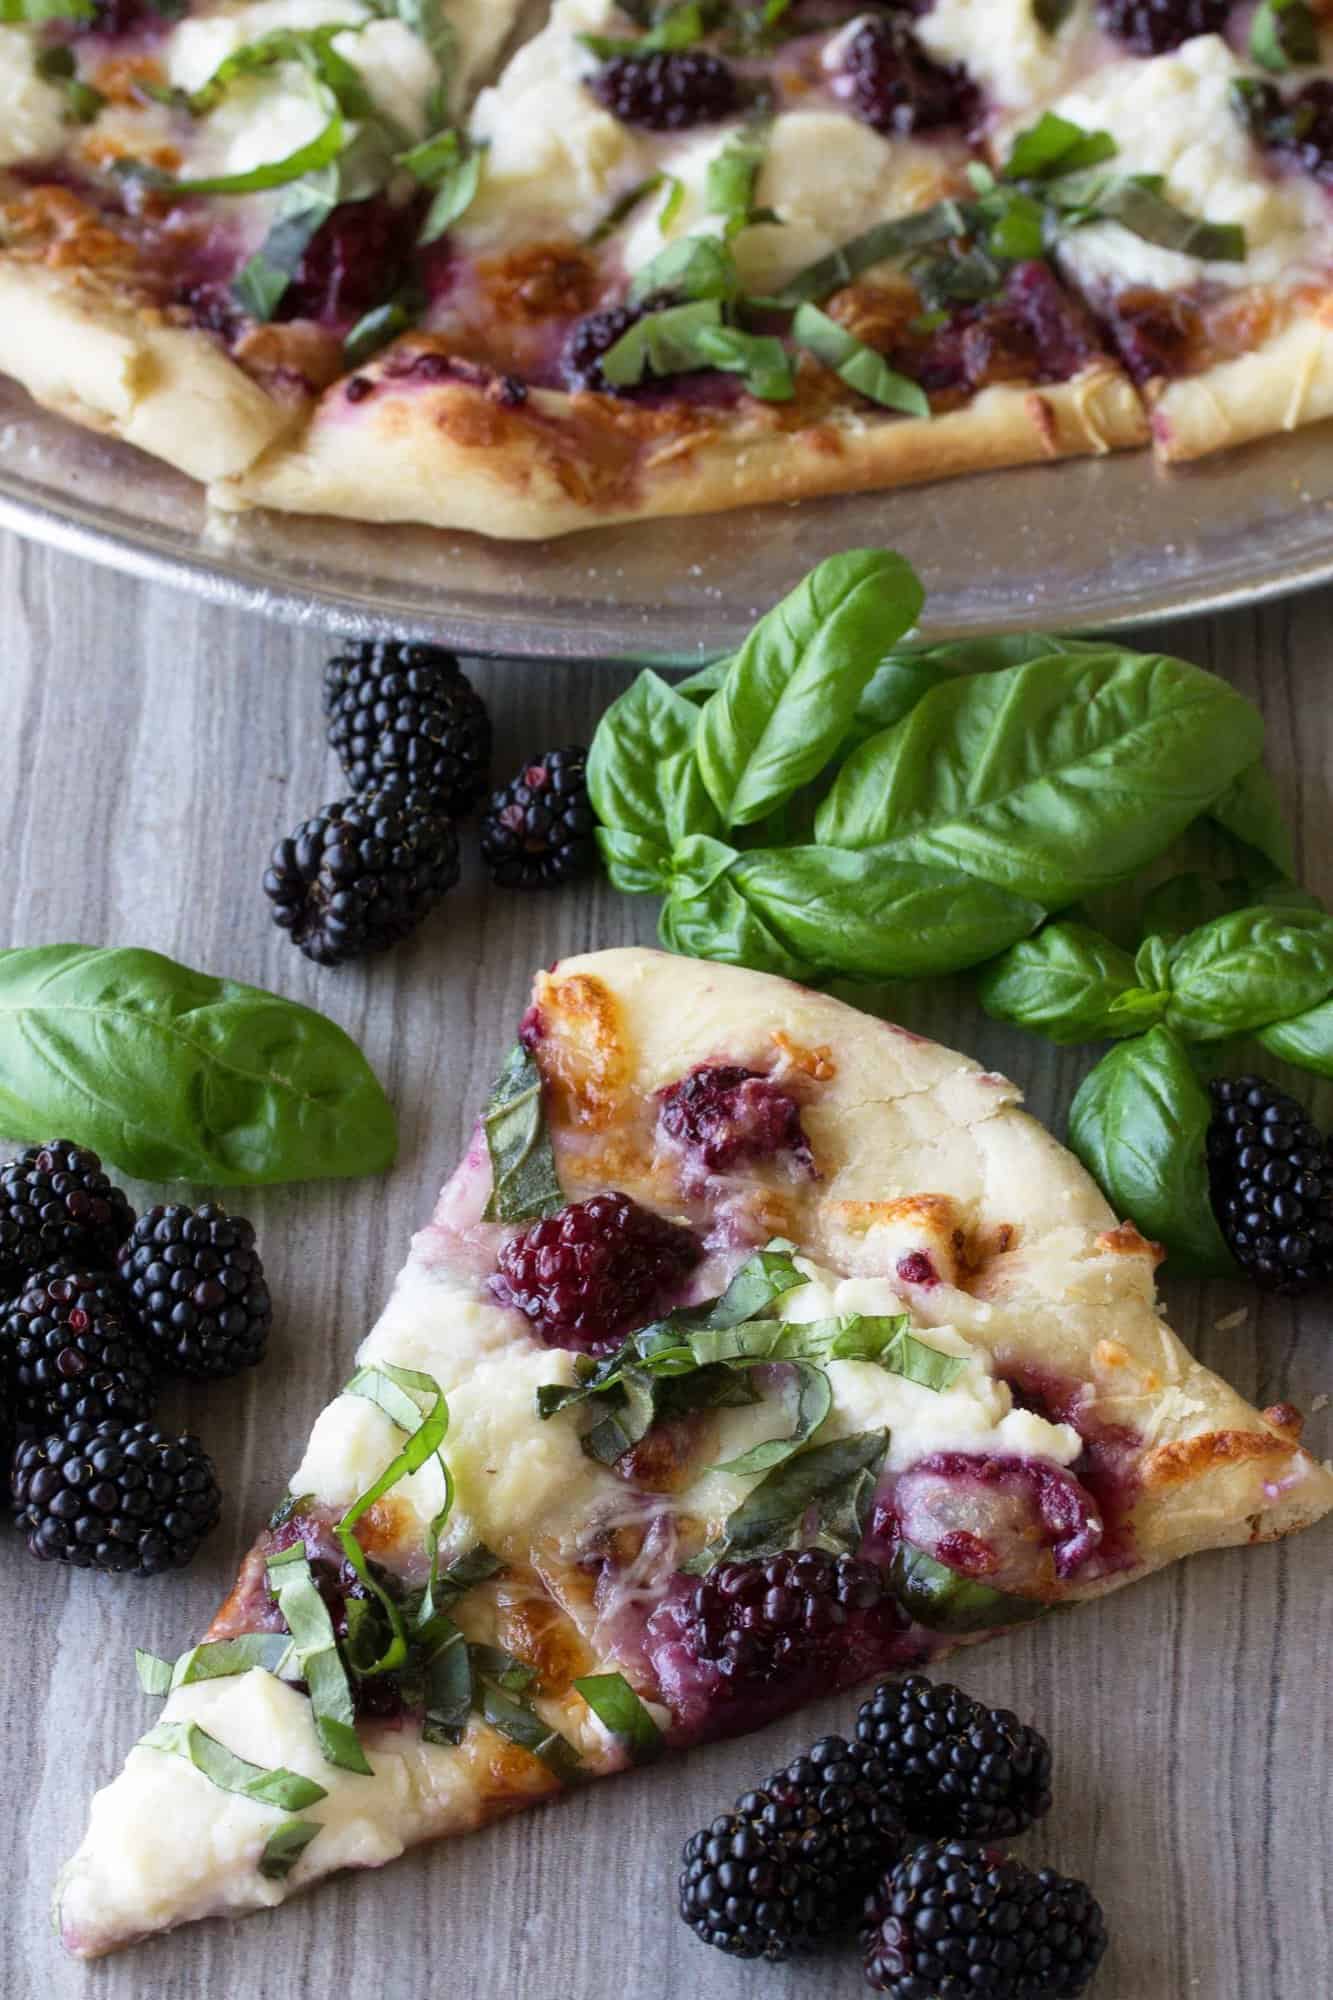 Dress up your pizza with something a little different in this Blackberry Basil Ricotta Pizza. It's elegant. It's simple. And it's totally delicious!